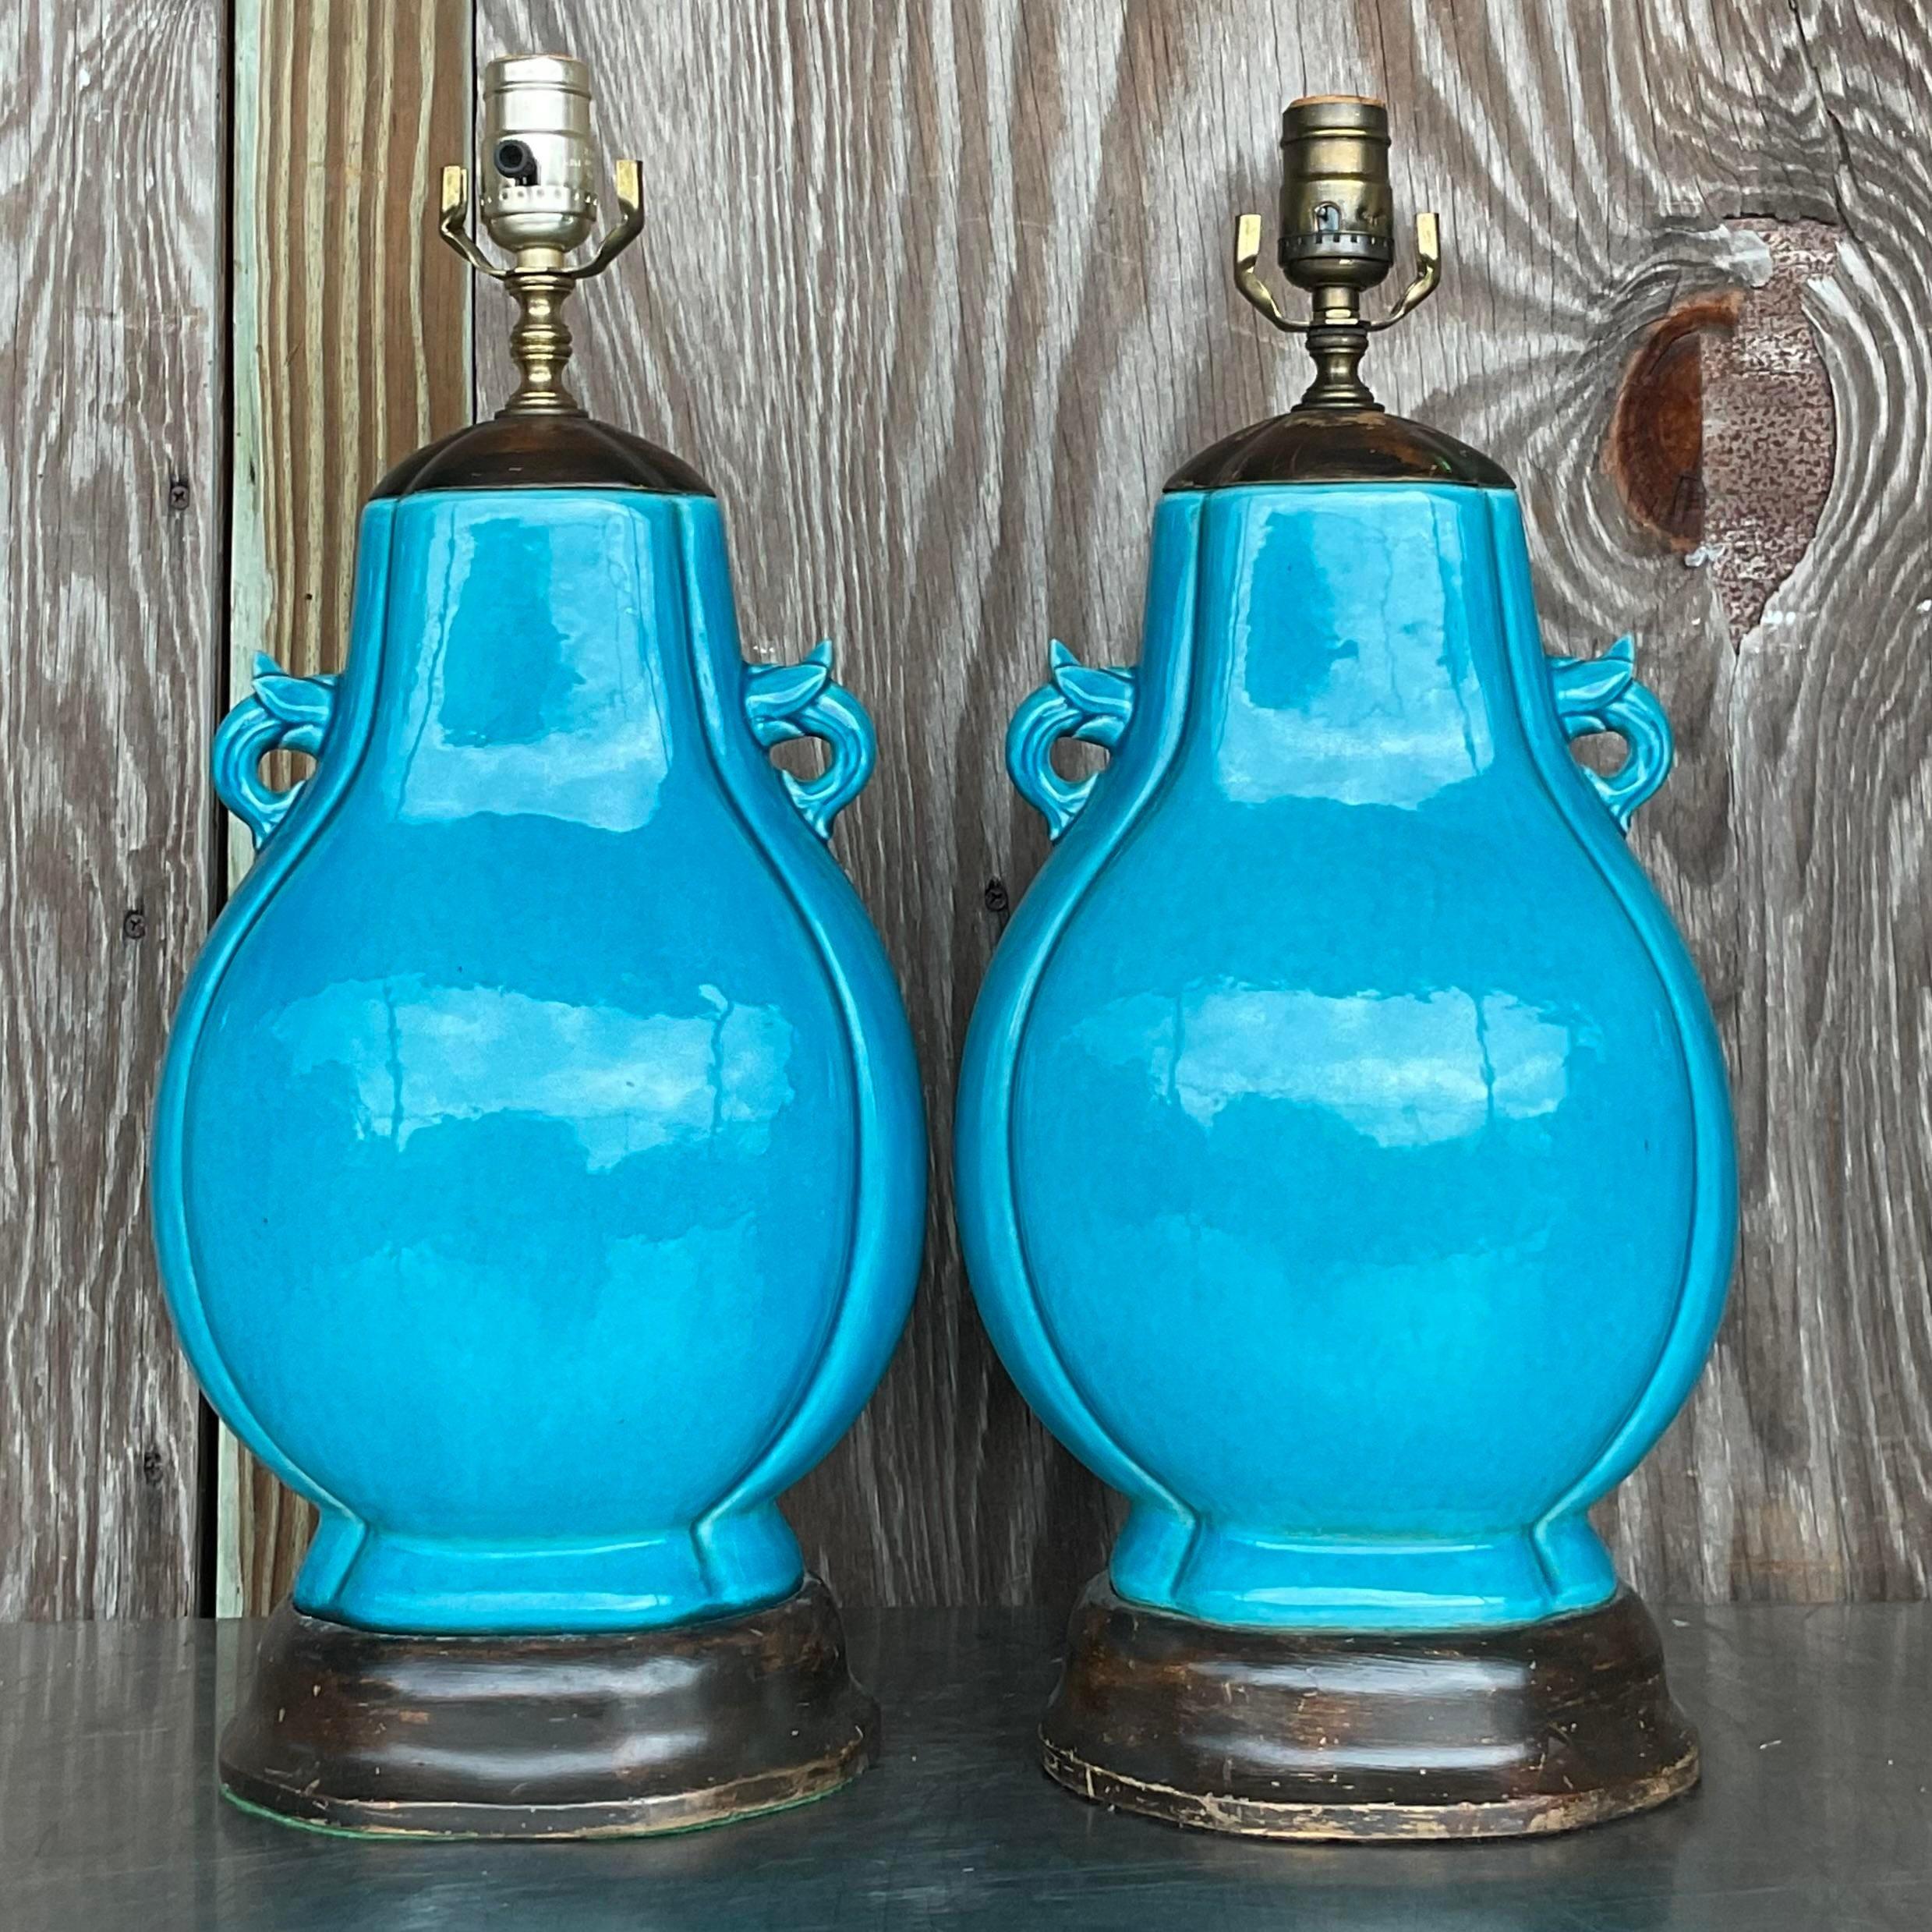 20th Century Vintage Boho Turquoise Glazed Ceramic Moonflask Table Lamps - a Pair For Sale